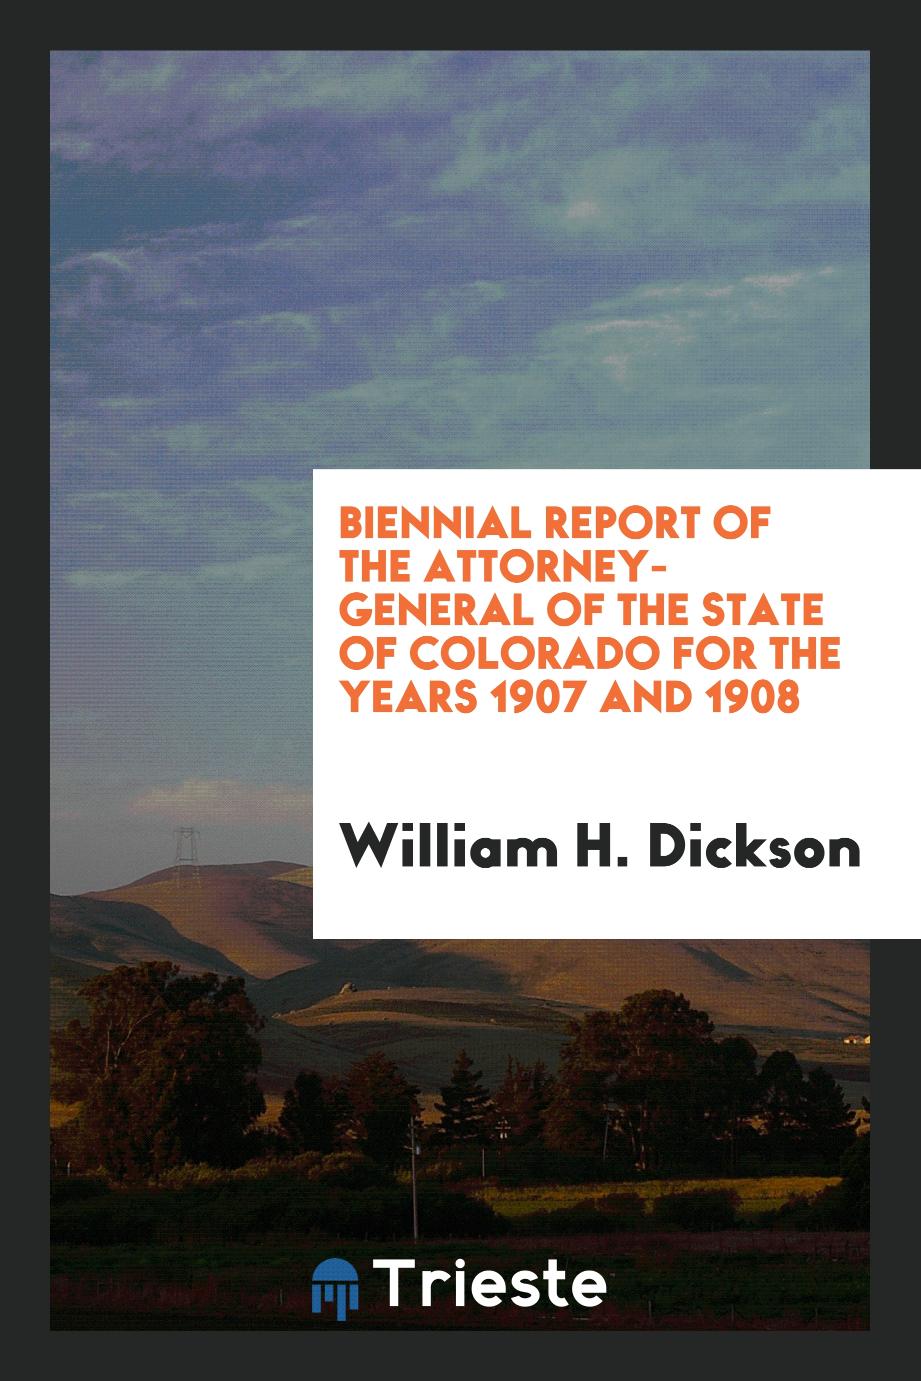 Biennial Report of the Attorney-General of the State of Colorado for the Years 1907 and 1908